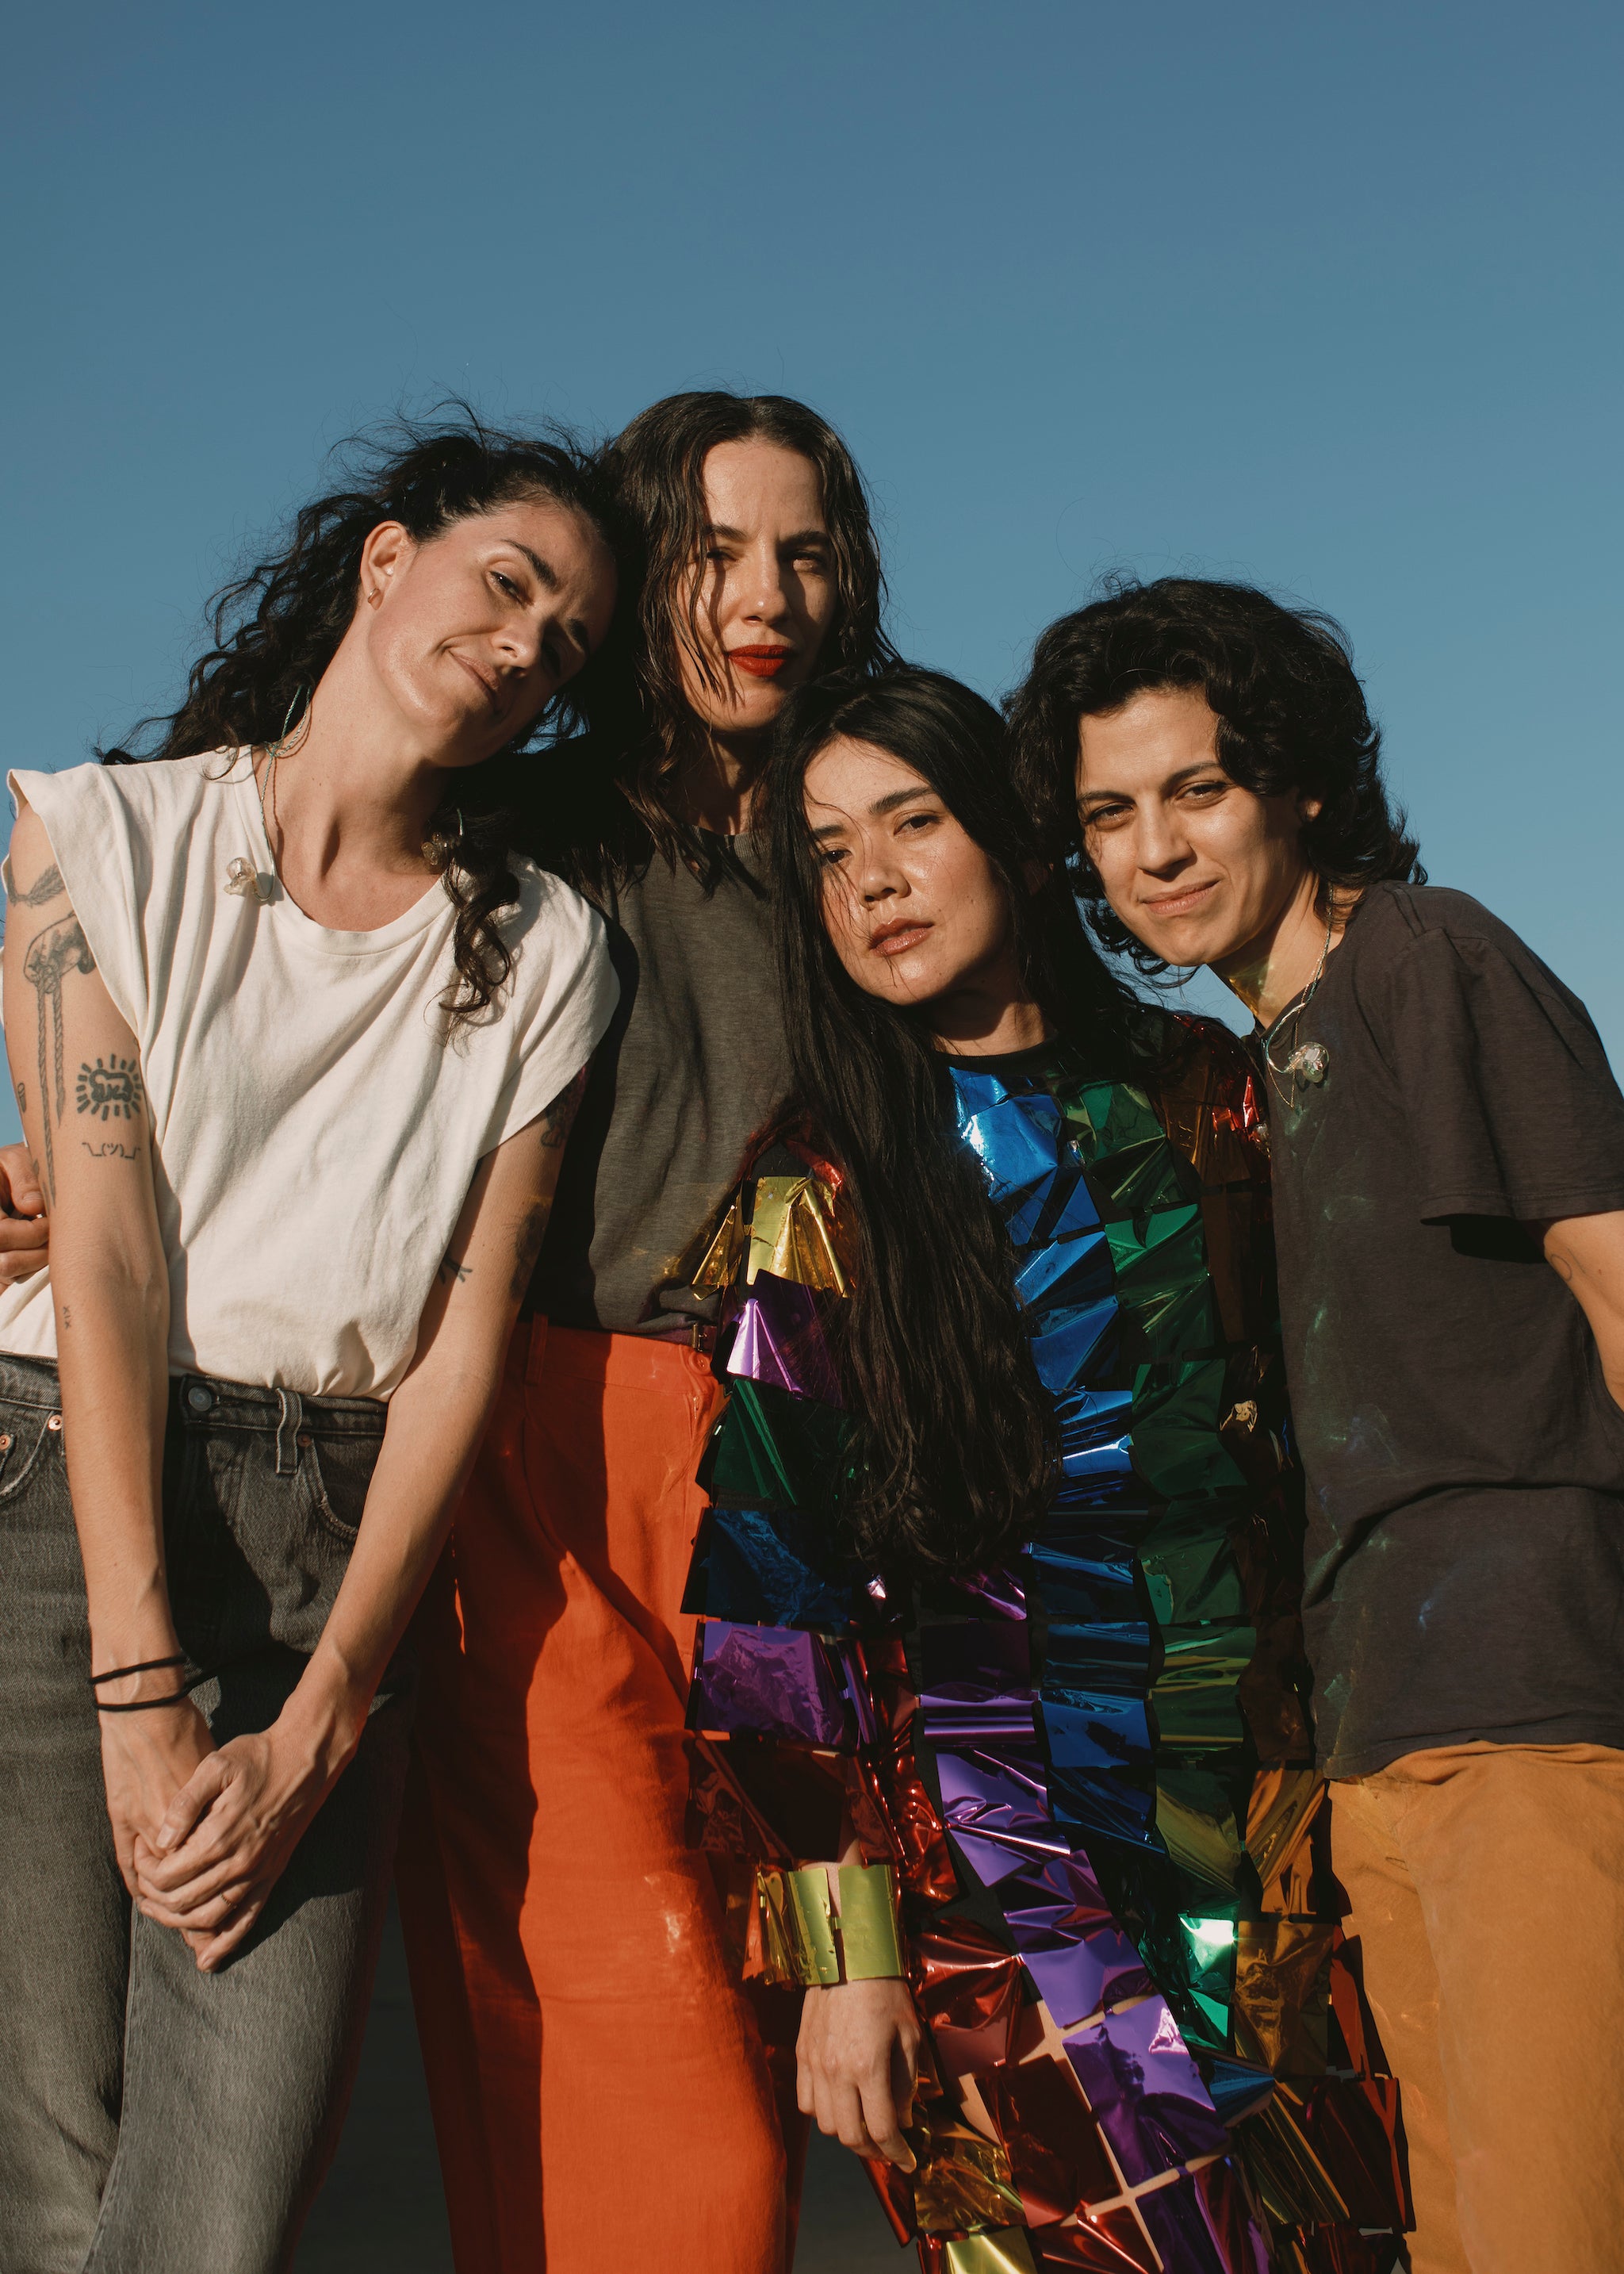 CSS: ‘It makes me proud to see so many women doing gay stuff in music now’